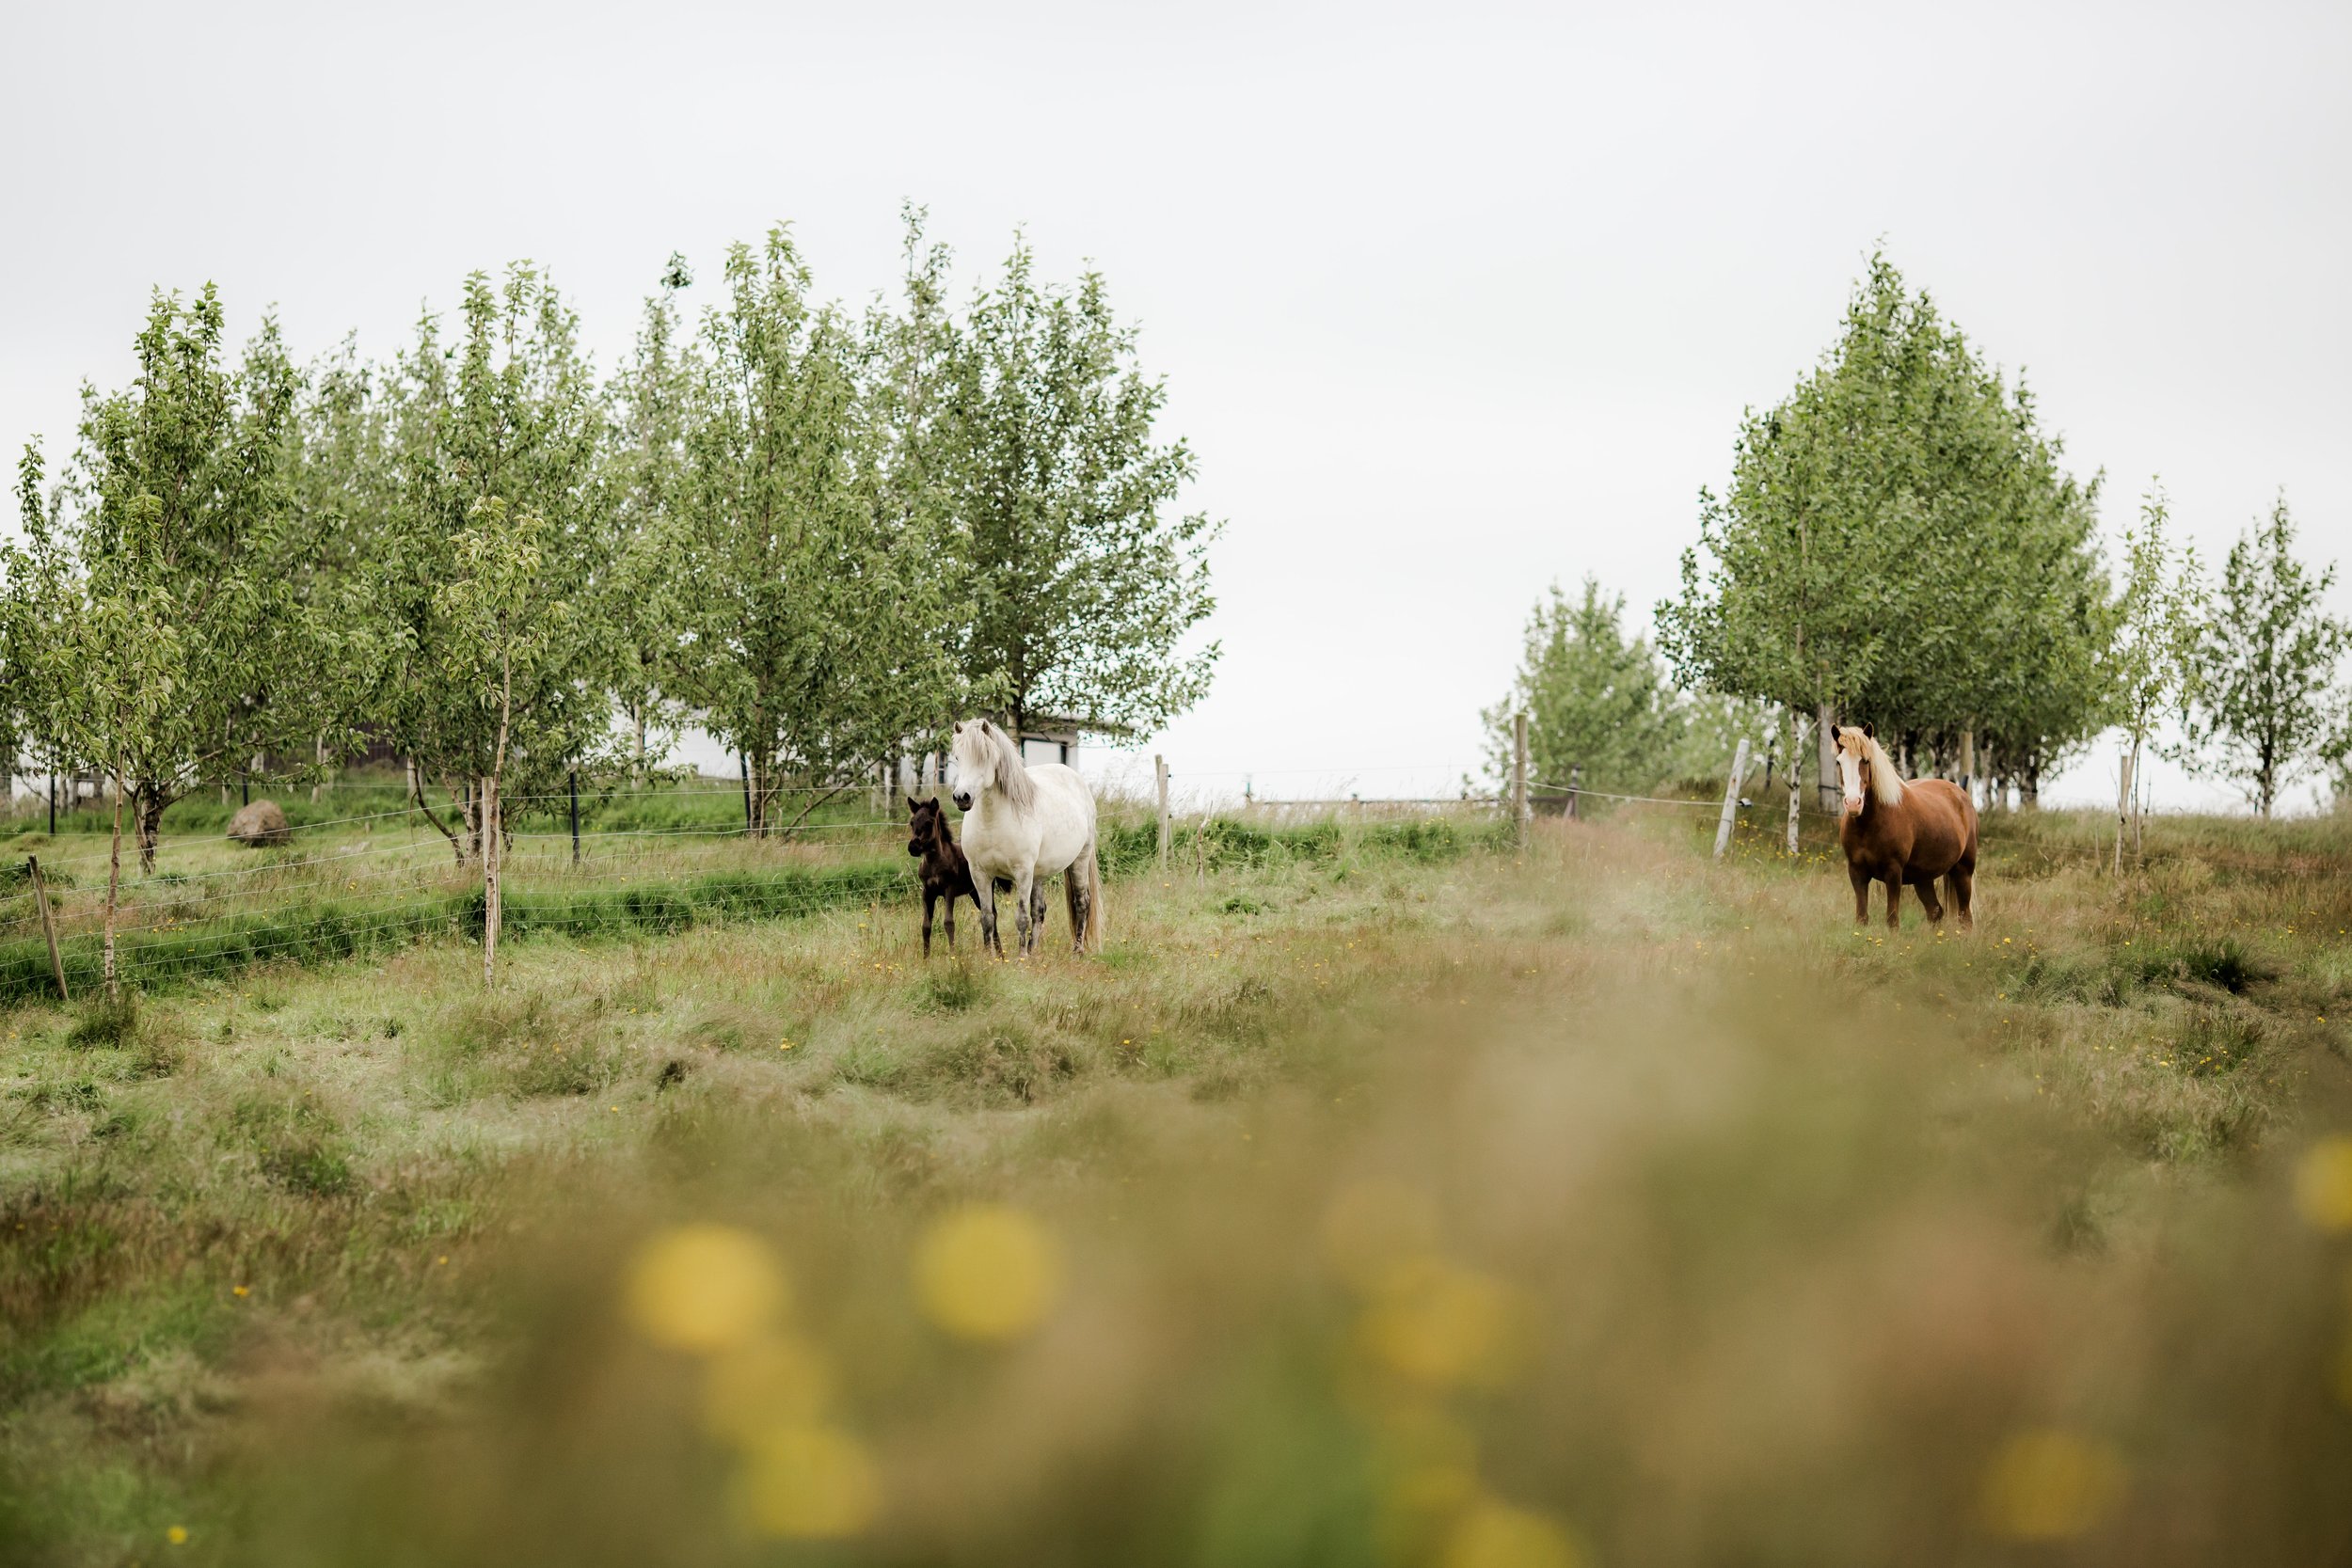 Horses in Iceland by Christina Swanson now on Cottage Hill46.jpg